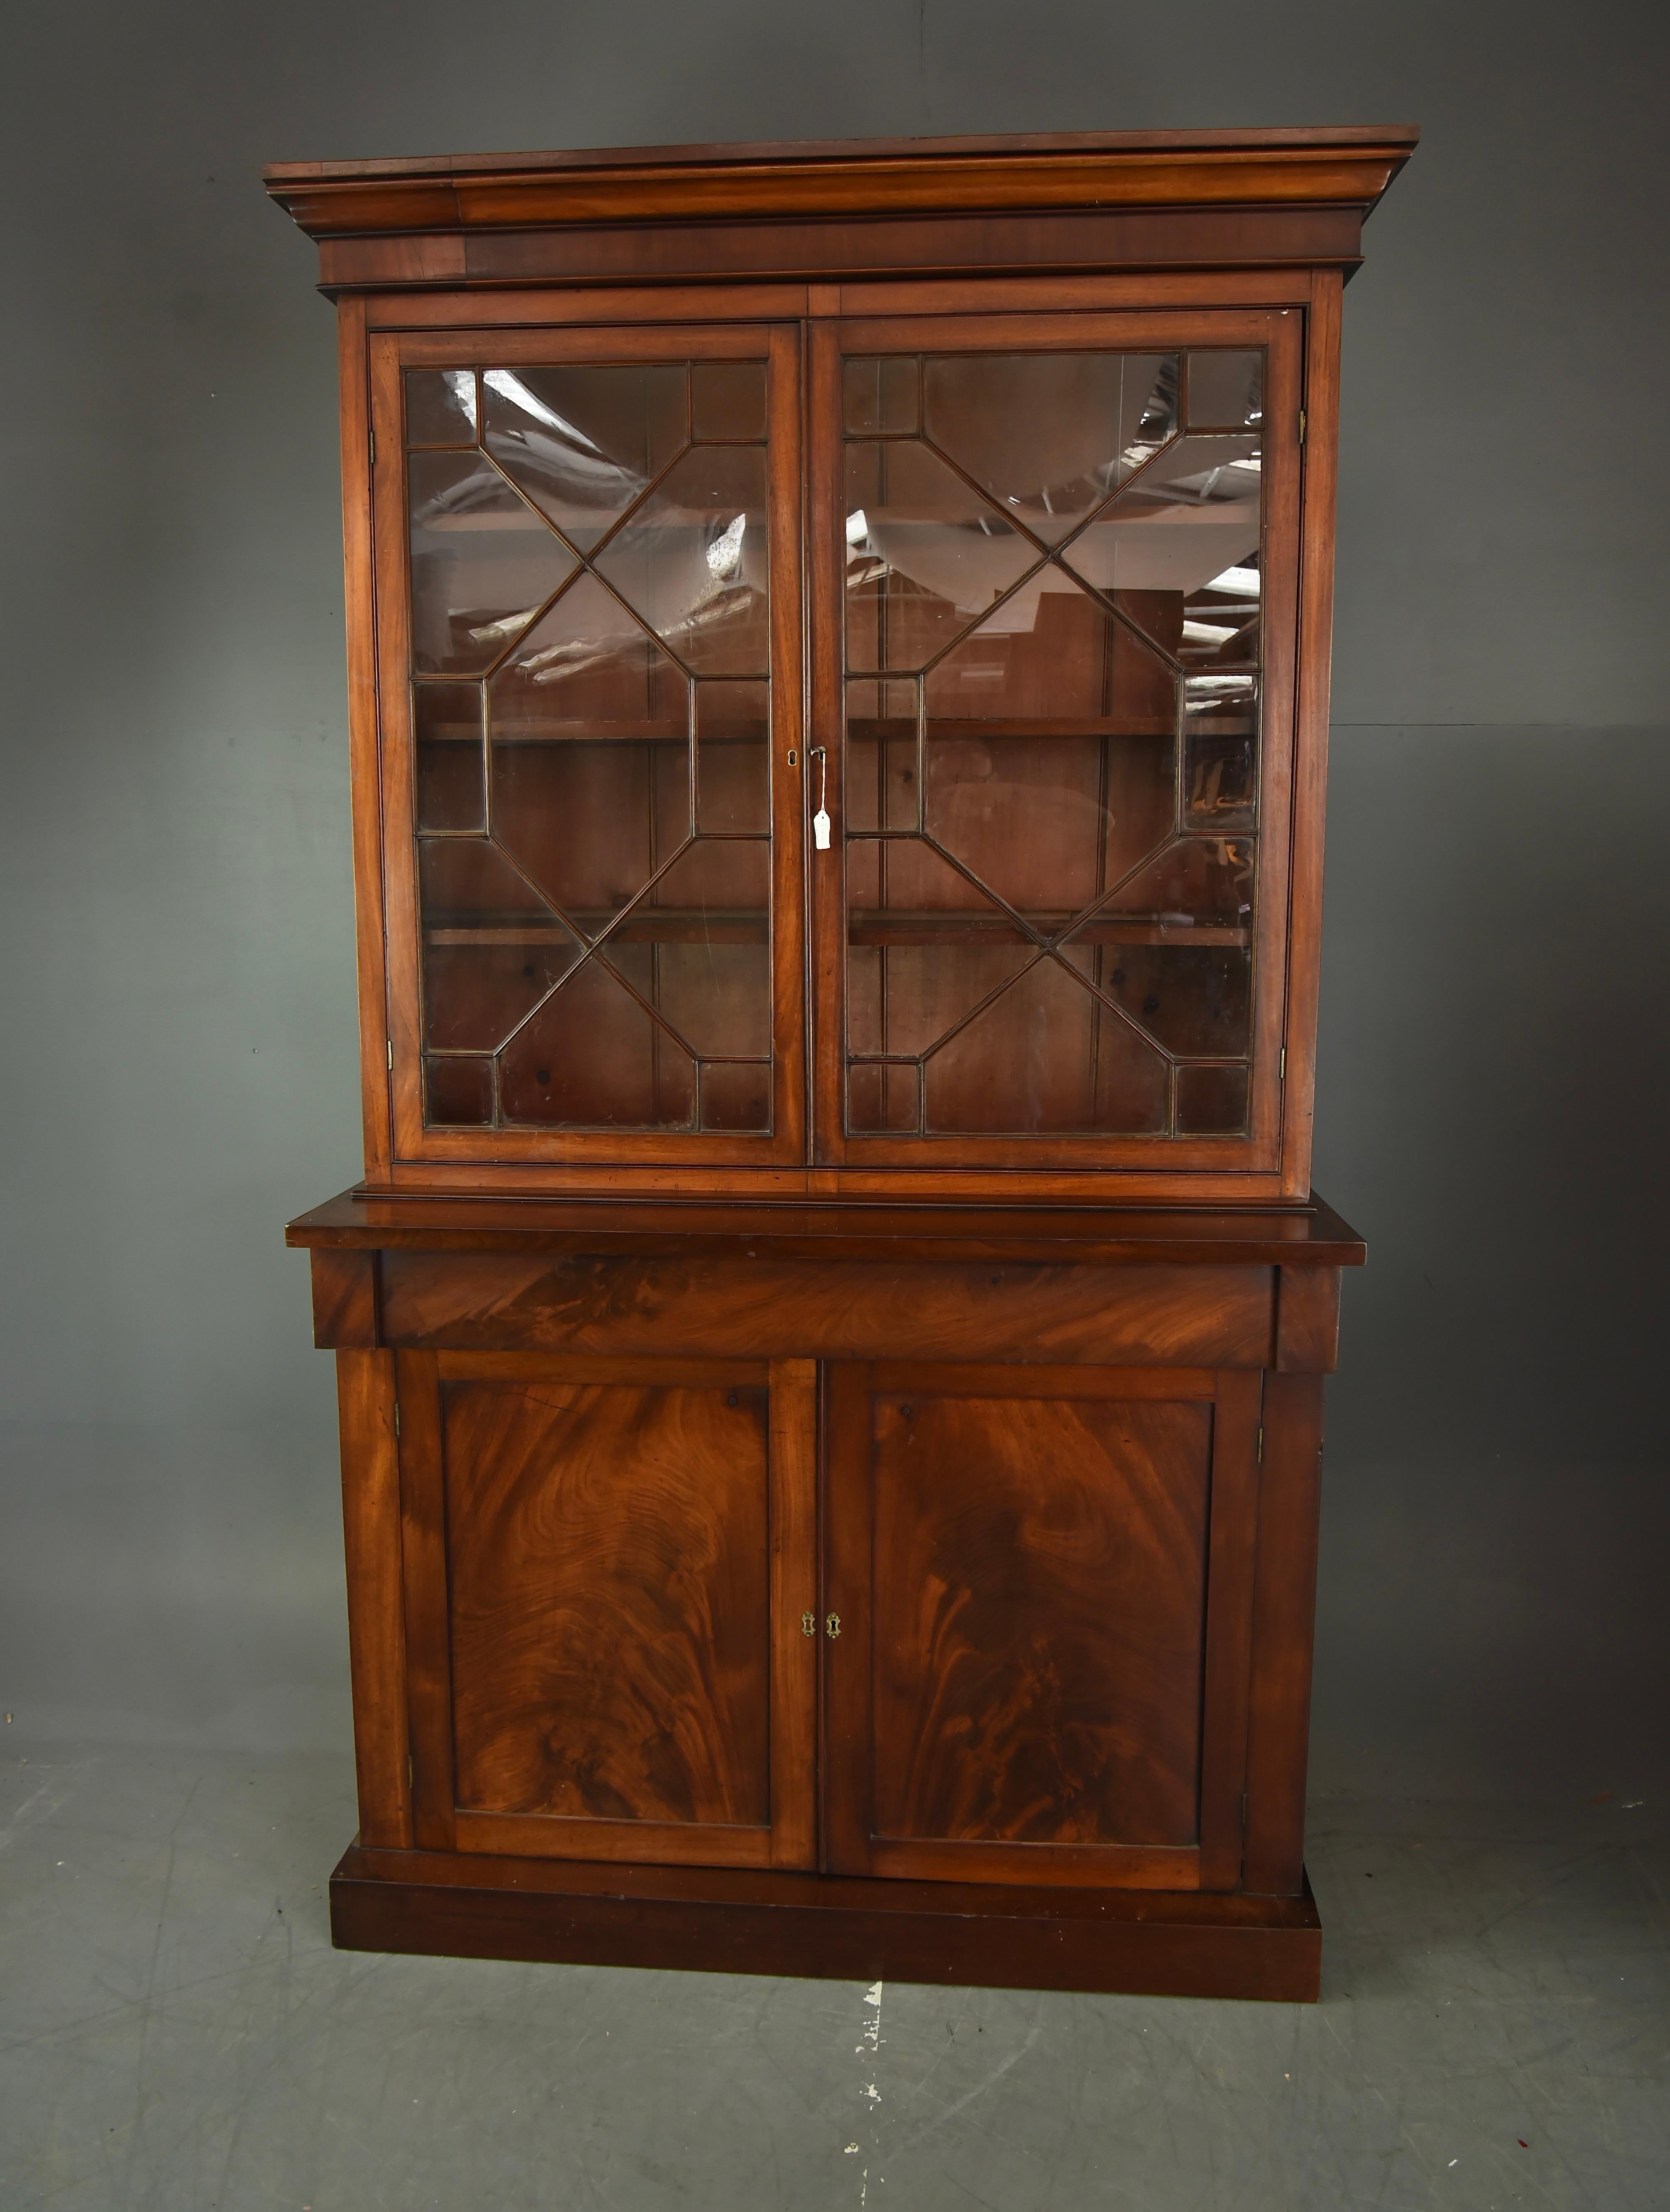 Good early Victorian mahogany two door bookcase circa 1840 
The bookcase has three fixed shelves behind two glazed doors ,the internal depth is 23.5 cm  ,with a cupboard below with a single fixed shelf .
The bookcase is in very good condition with a